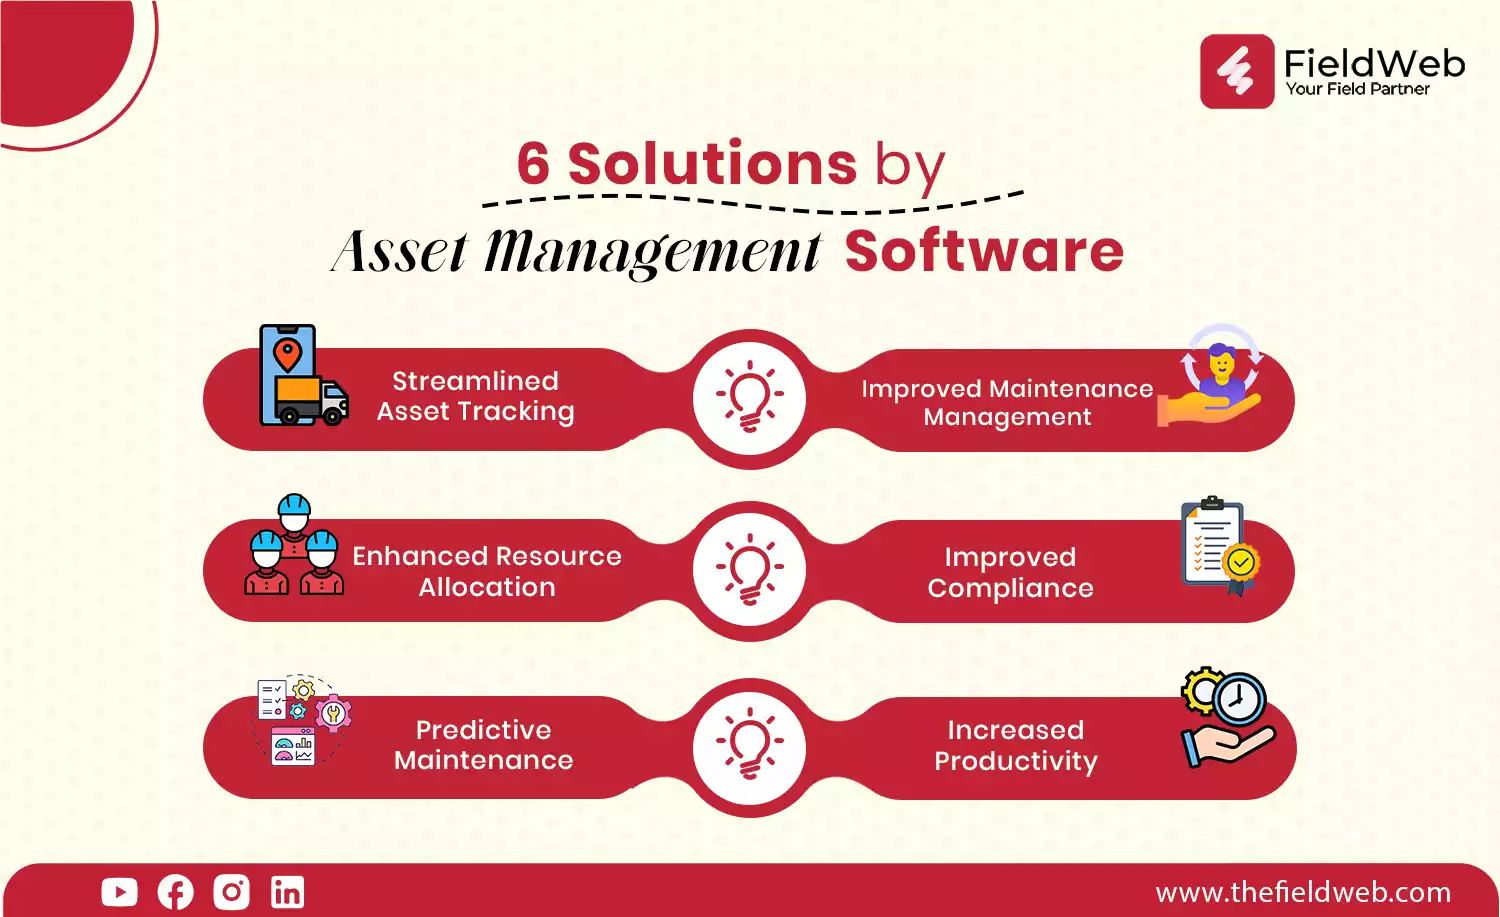 image is displaying 6 solutions of field business challenges by asset management software